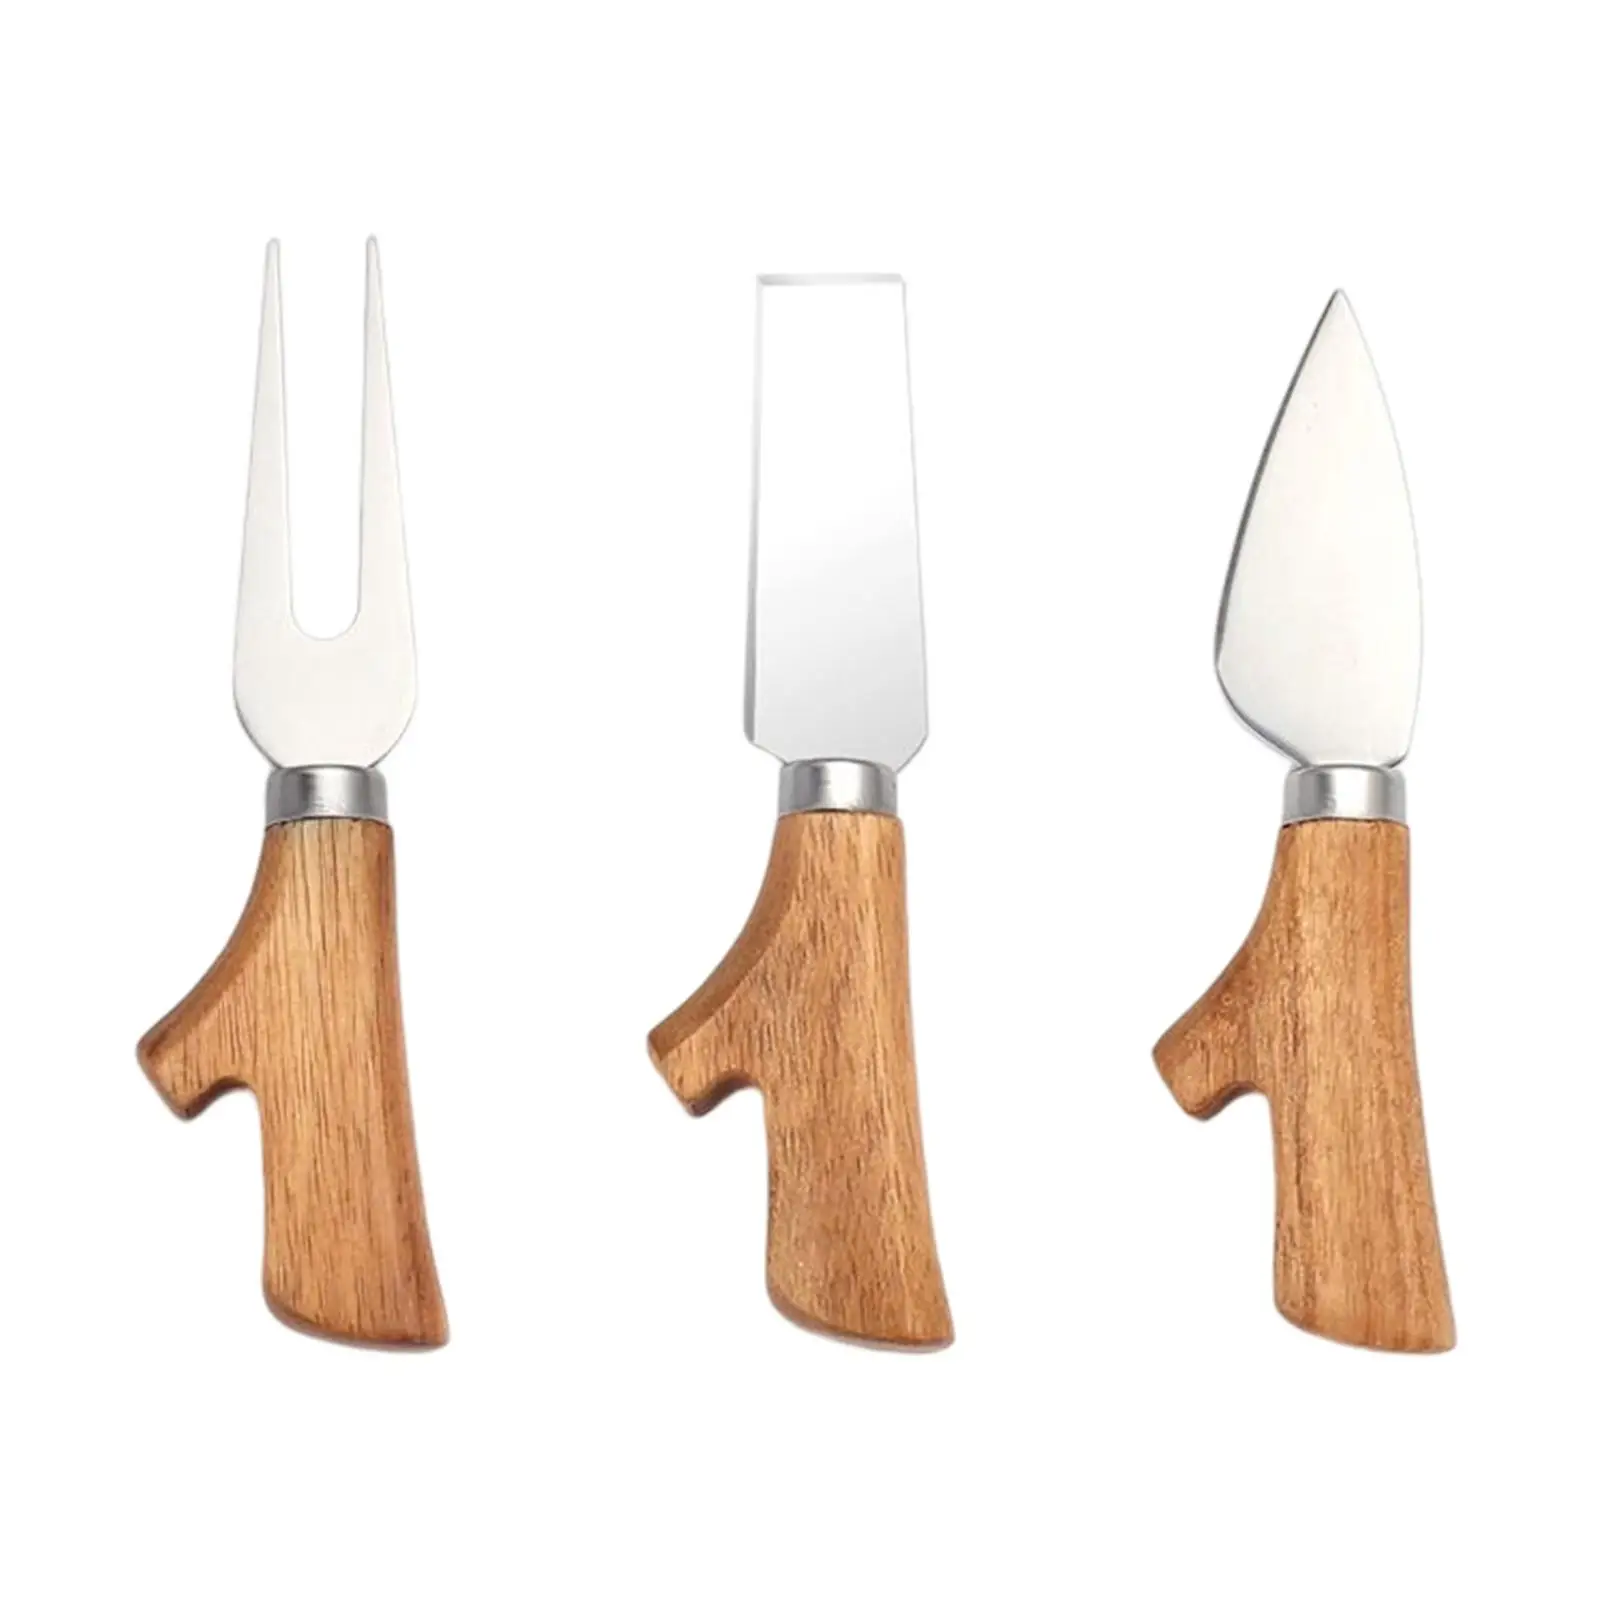 3Pcs Cheese Knives Set Wooden Handle Professional Accessories for Dessert Cheese Salad